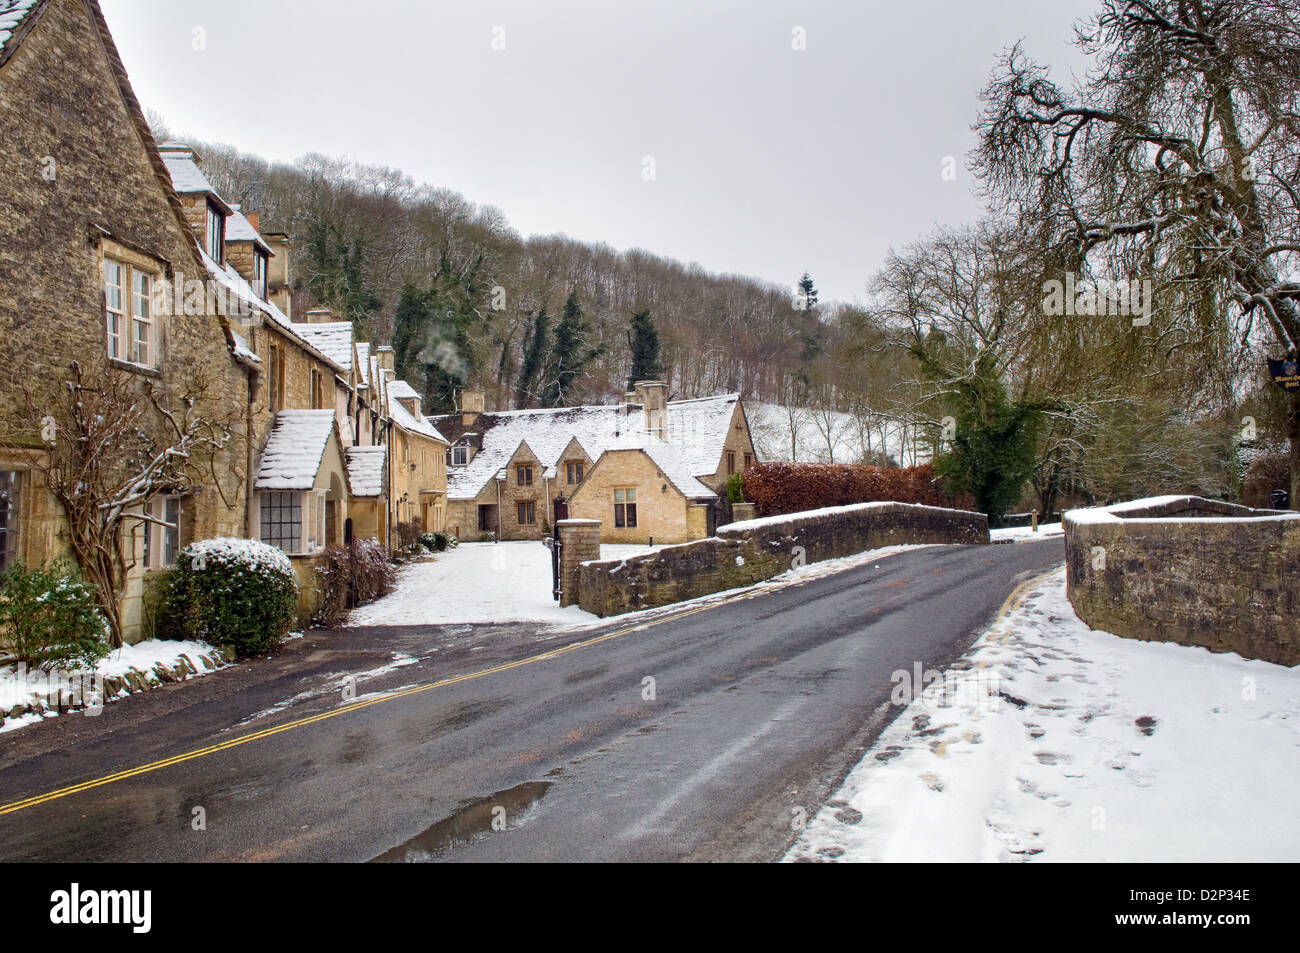 Winter snow scene of the picturesque village of Castle Combe, Cotswolds, England Stock Photo